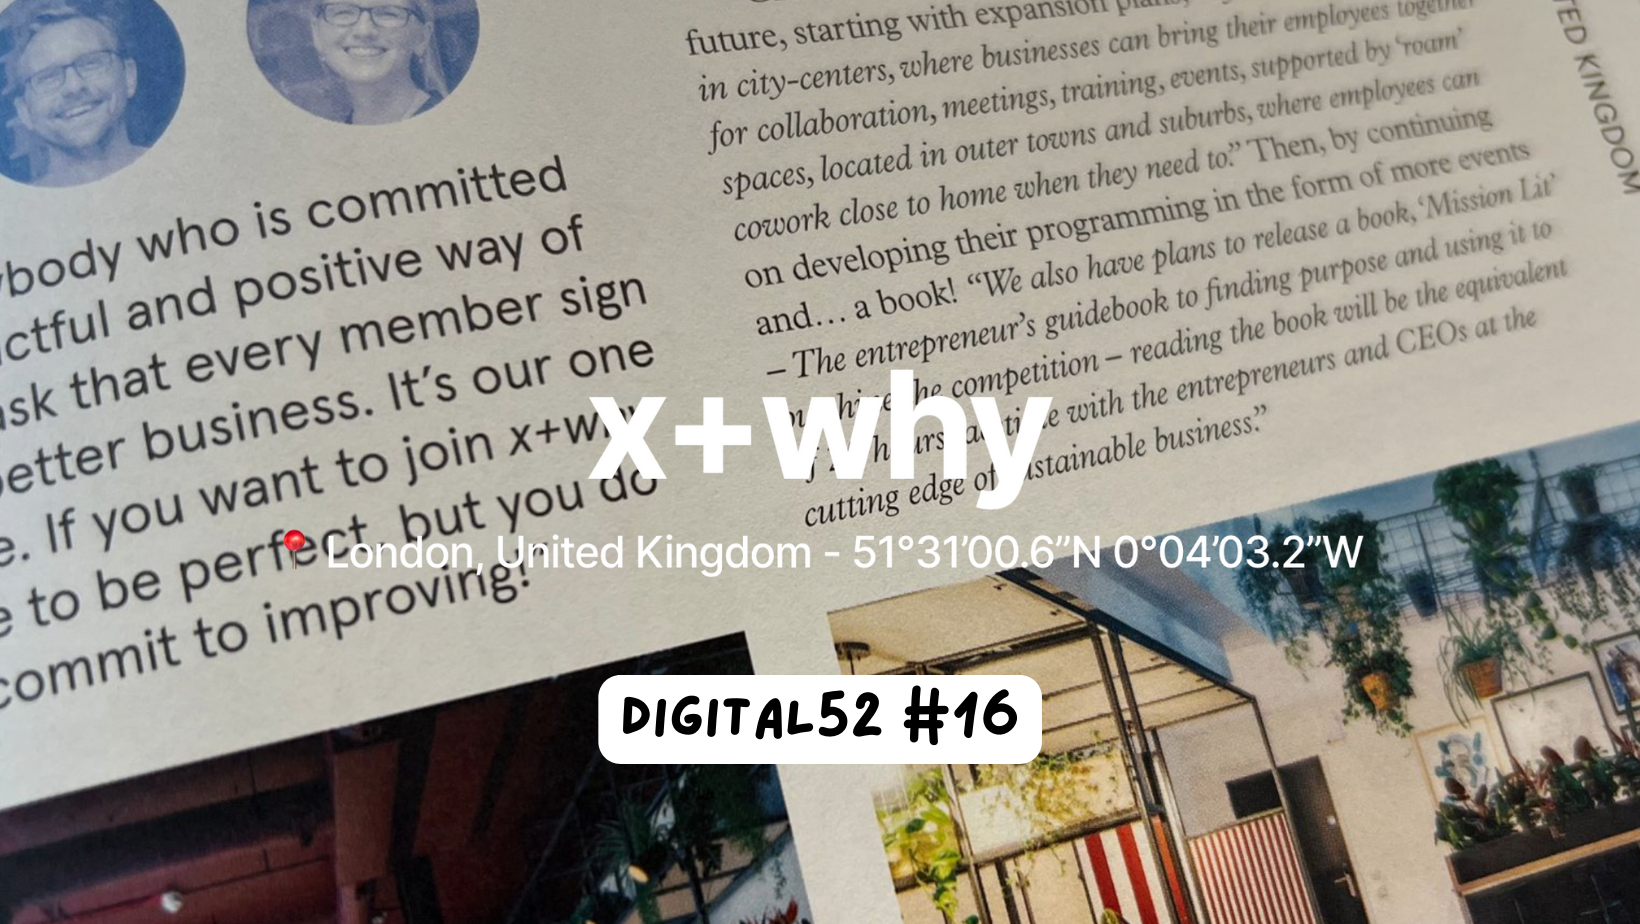 Essential Insights for Coworking in 2024: 10 Key Findings from Digital52 Coworking Series